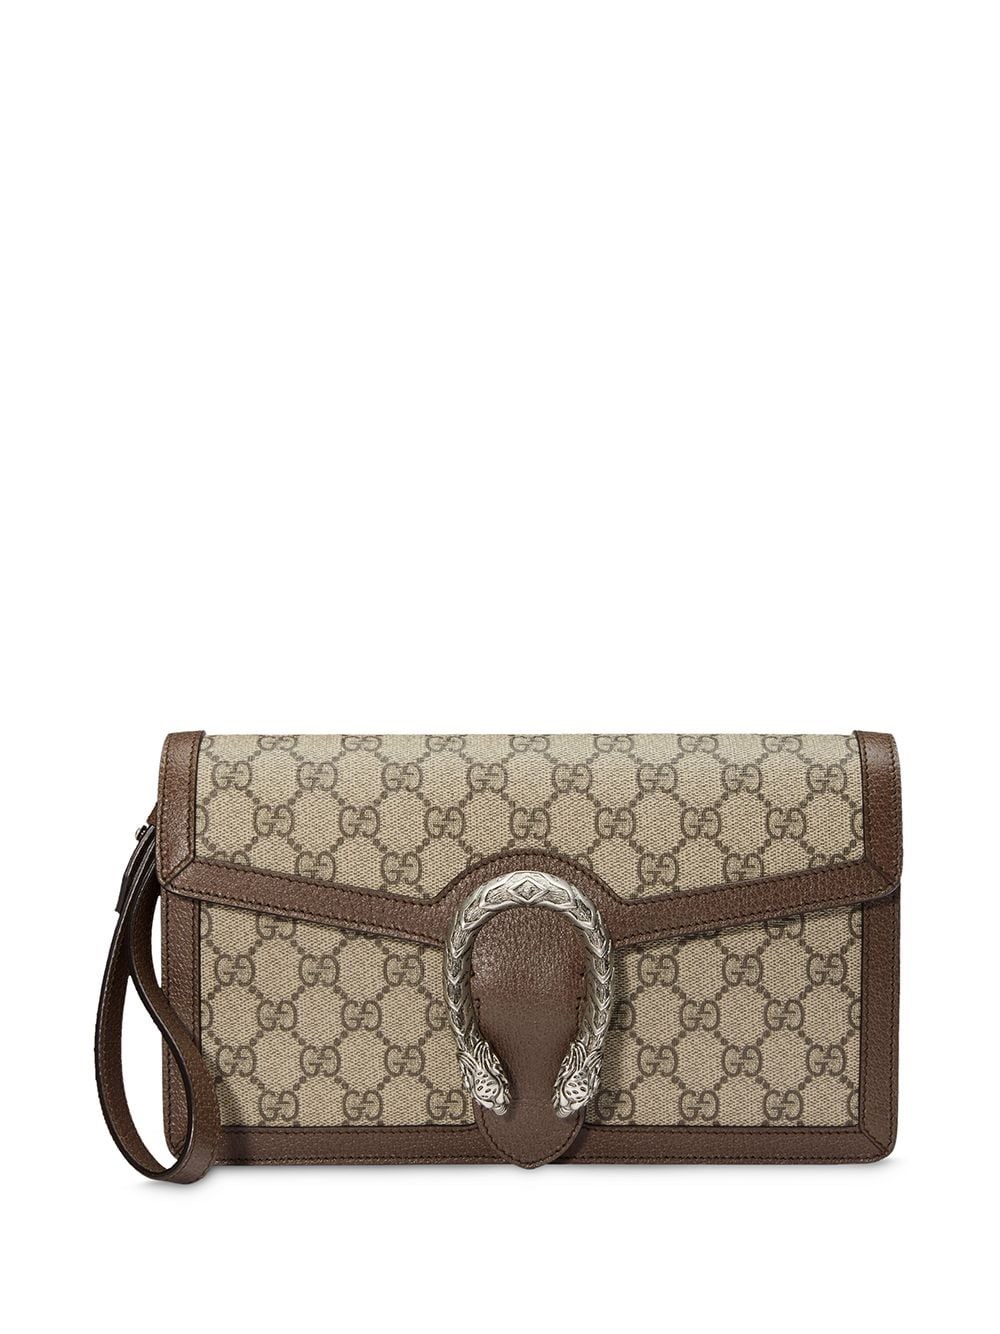 Fødested andrageren Ydmyge gucci BORSA DIONYSUS LOGO available on montiboutique.com - 34820